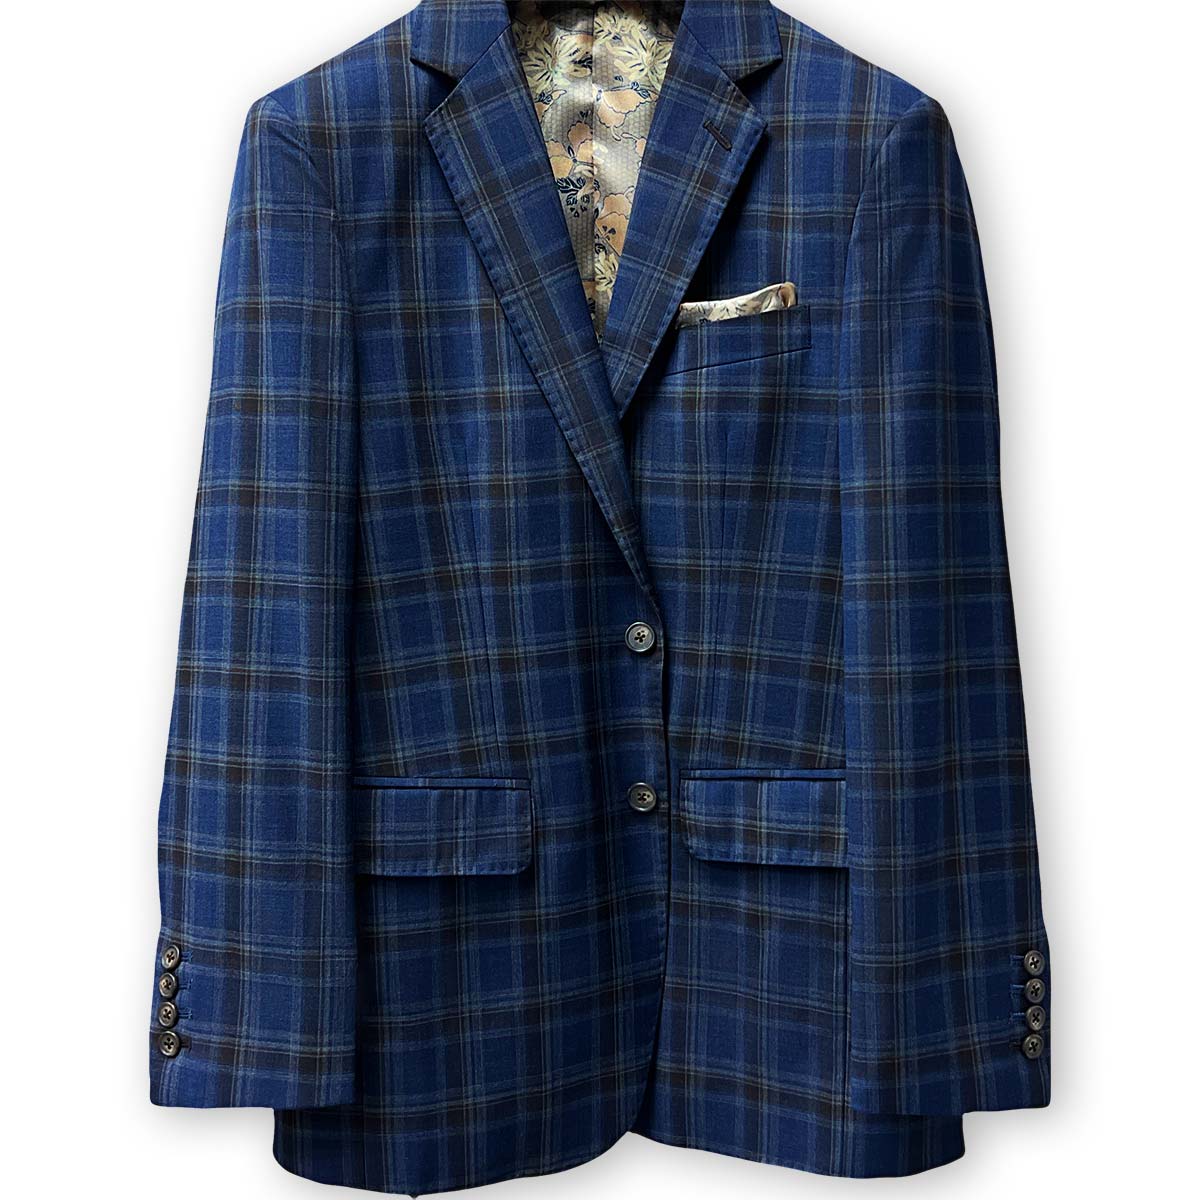 Ideal for grooms, a dark blue and brown plaid 100% Australian Merino wool suit by Westwood Hart.